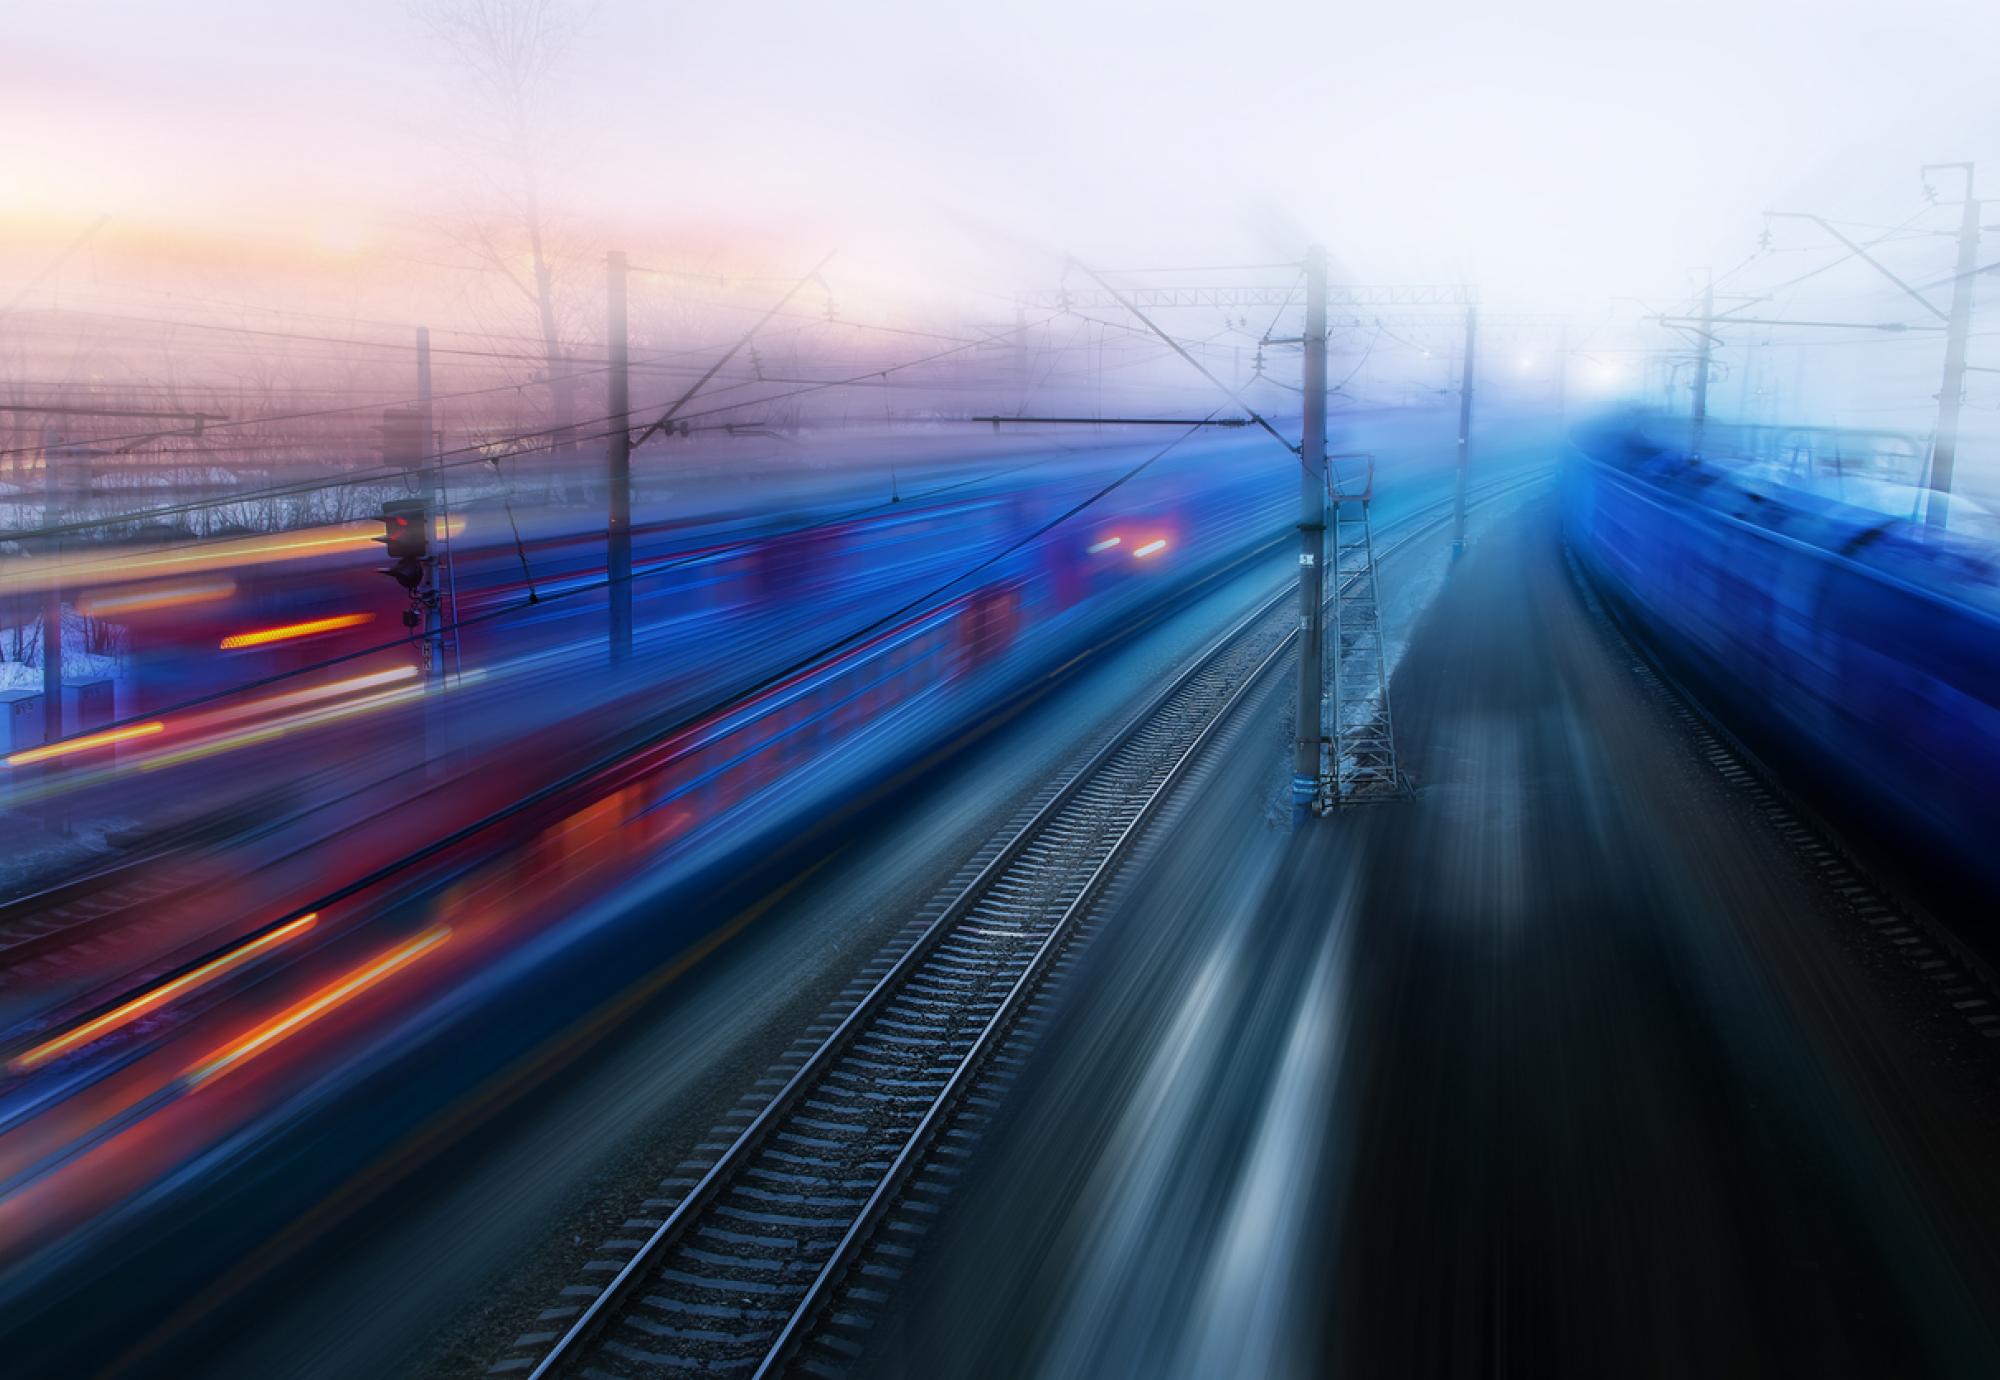 Motion blurred image of trains